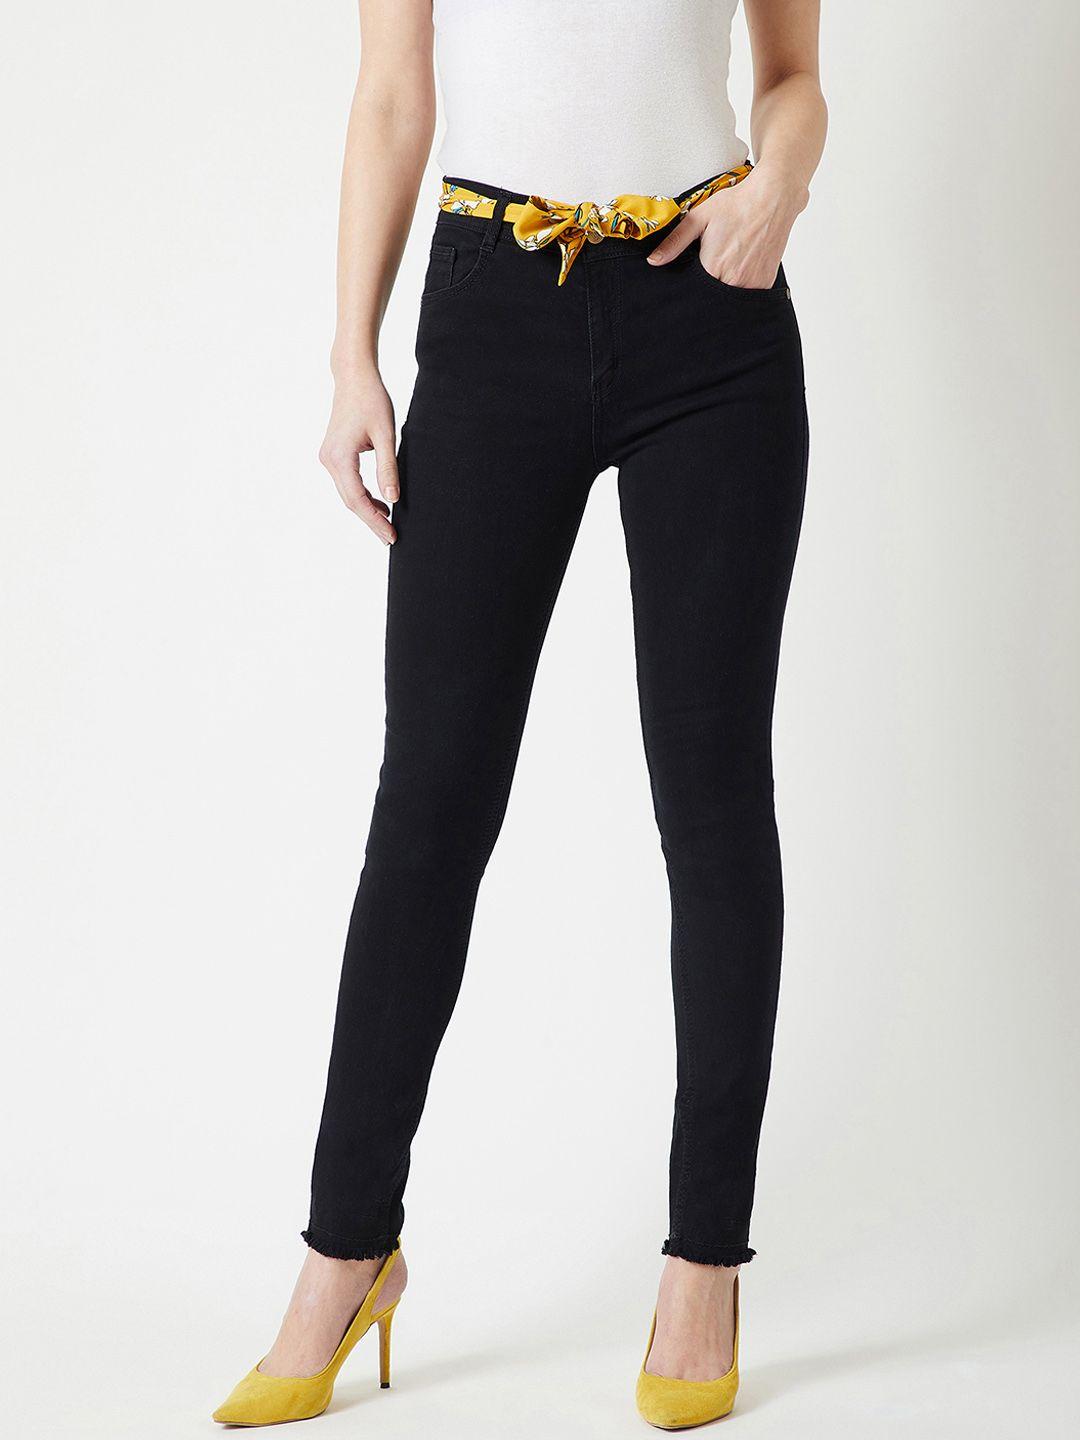 miss-chase-women-black-slim-fit-high-rise-clean-look-stretchable-jeans